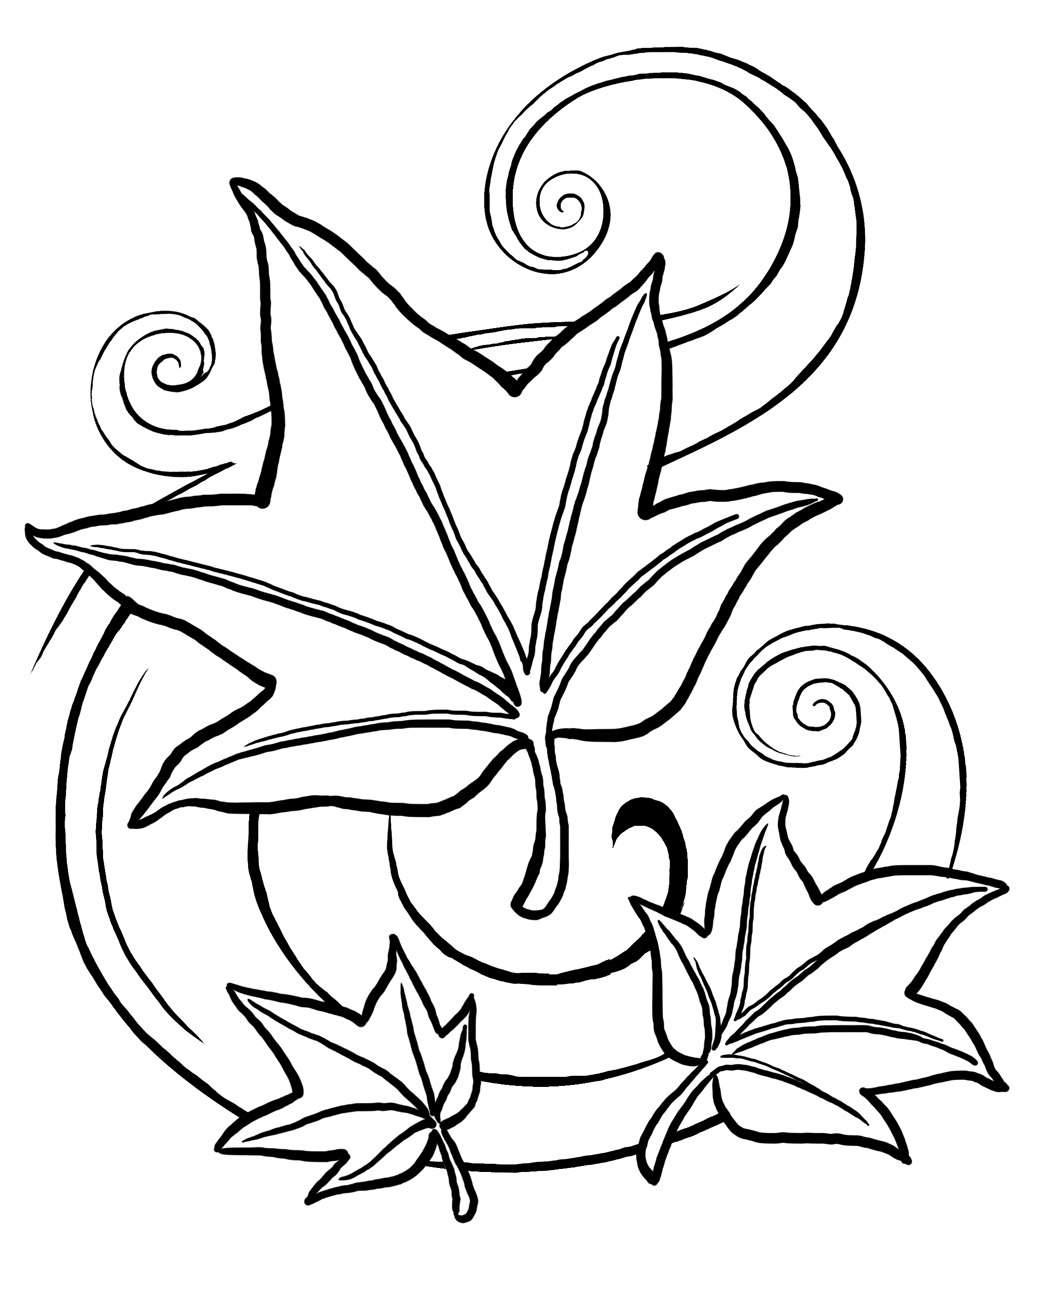 Trends For > Pot Leaf Coloring Pages